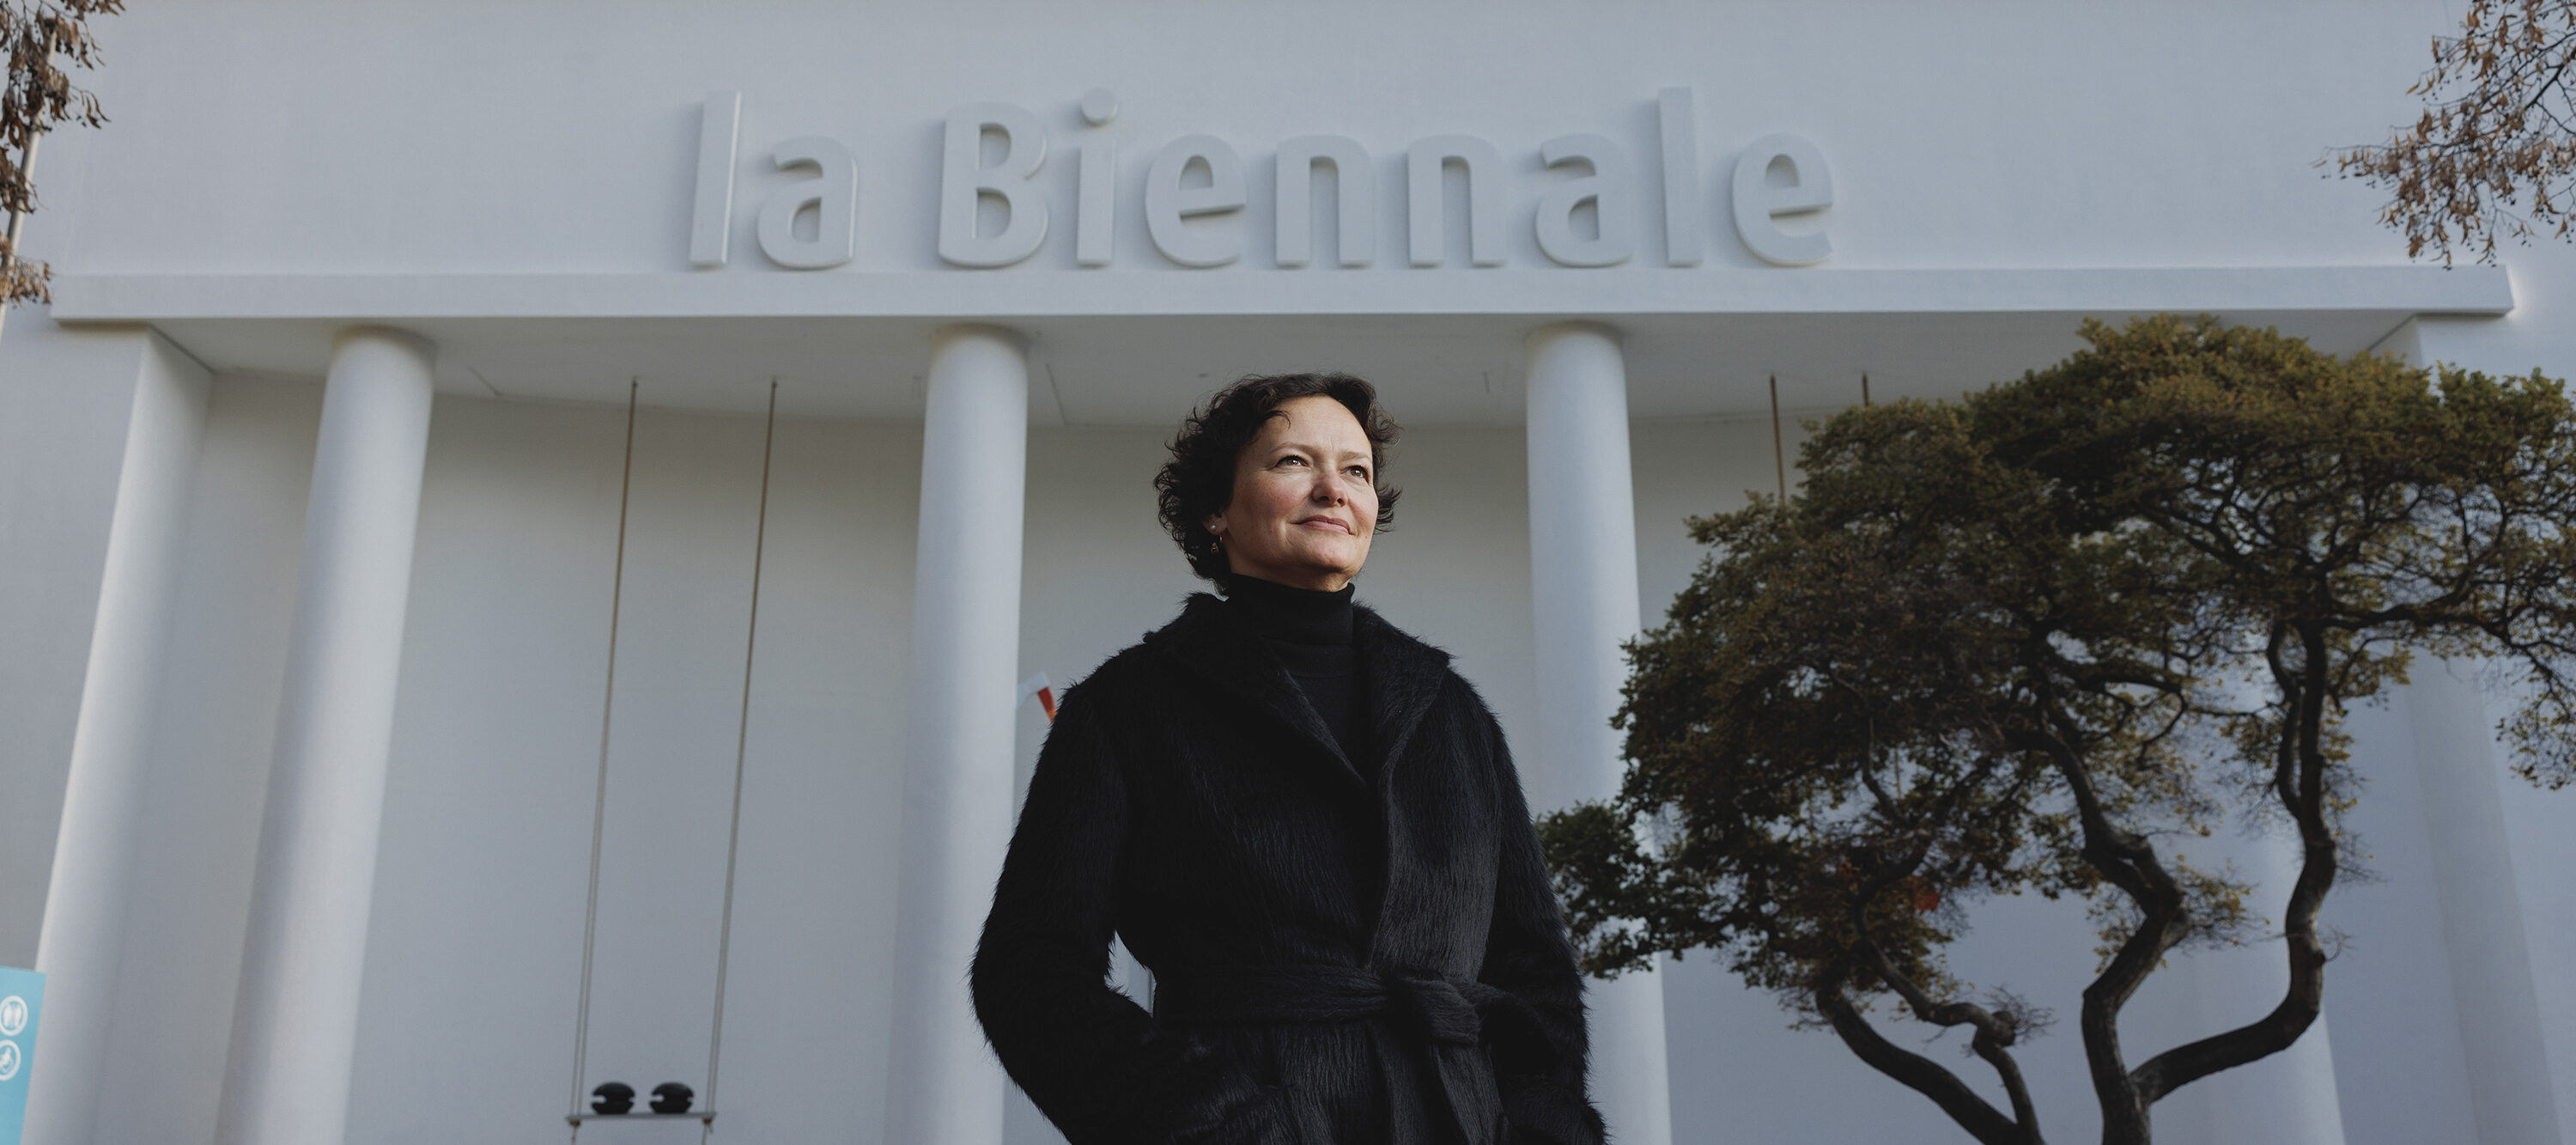 A woman in a black coat stands outside near a white building that has the name “la Biennale” on the top. She has a light skin tone and her dark brown hair is short and curly. A tree is in the background and she stares out, looking into the distance.